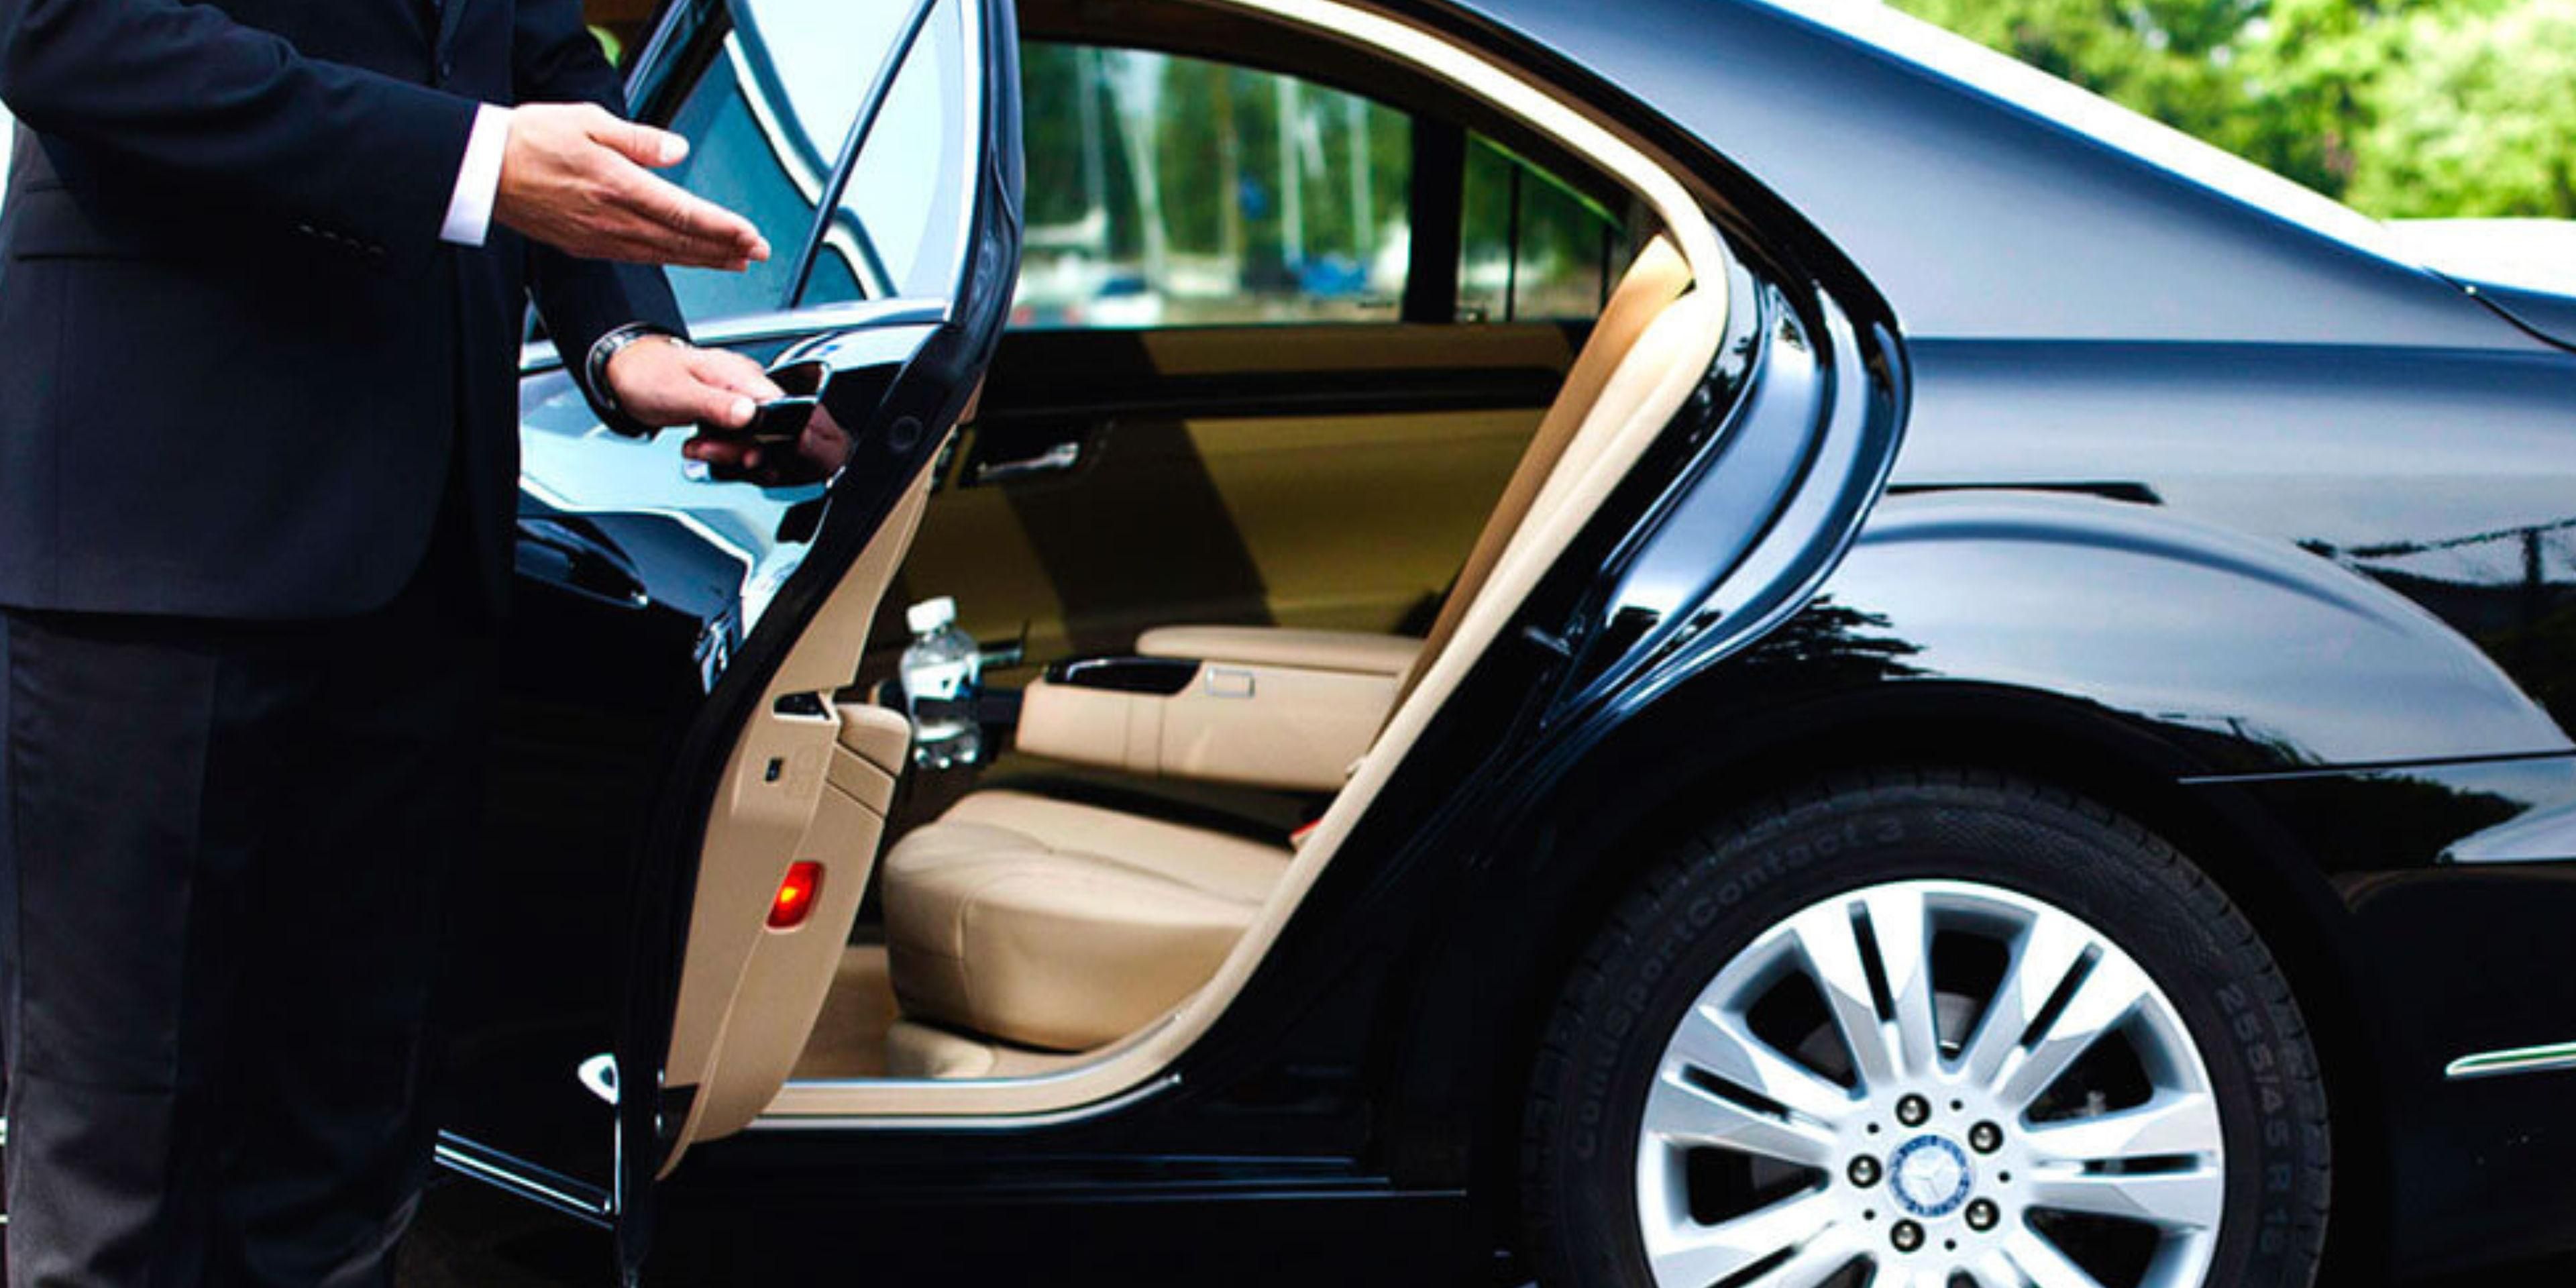 InterContinental Barcelona offers a wide range of luxurious transportation services with a professional chauffeur. Explore the area with a private driver as you relax and enjoy the destinations. 
Airport transfer service is also available through our concierge team.